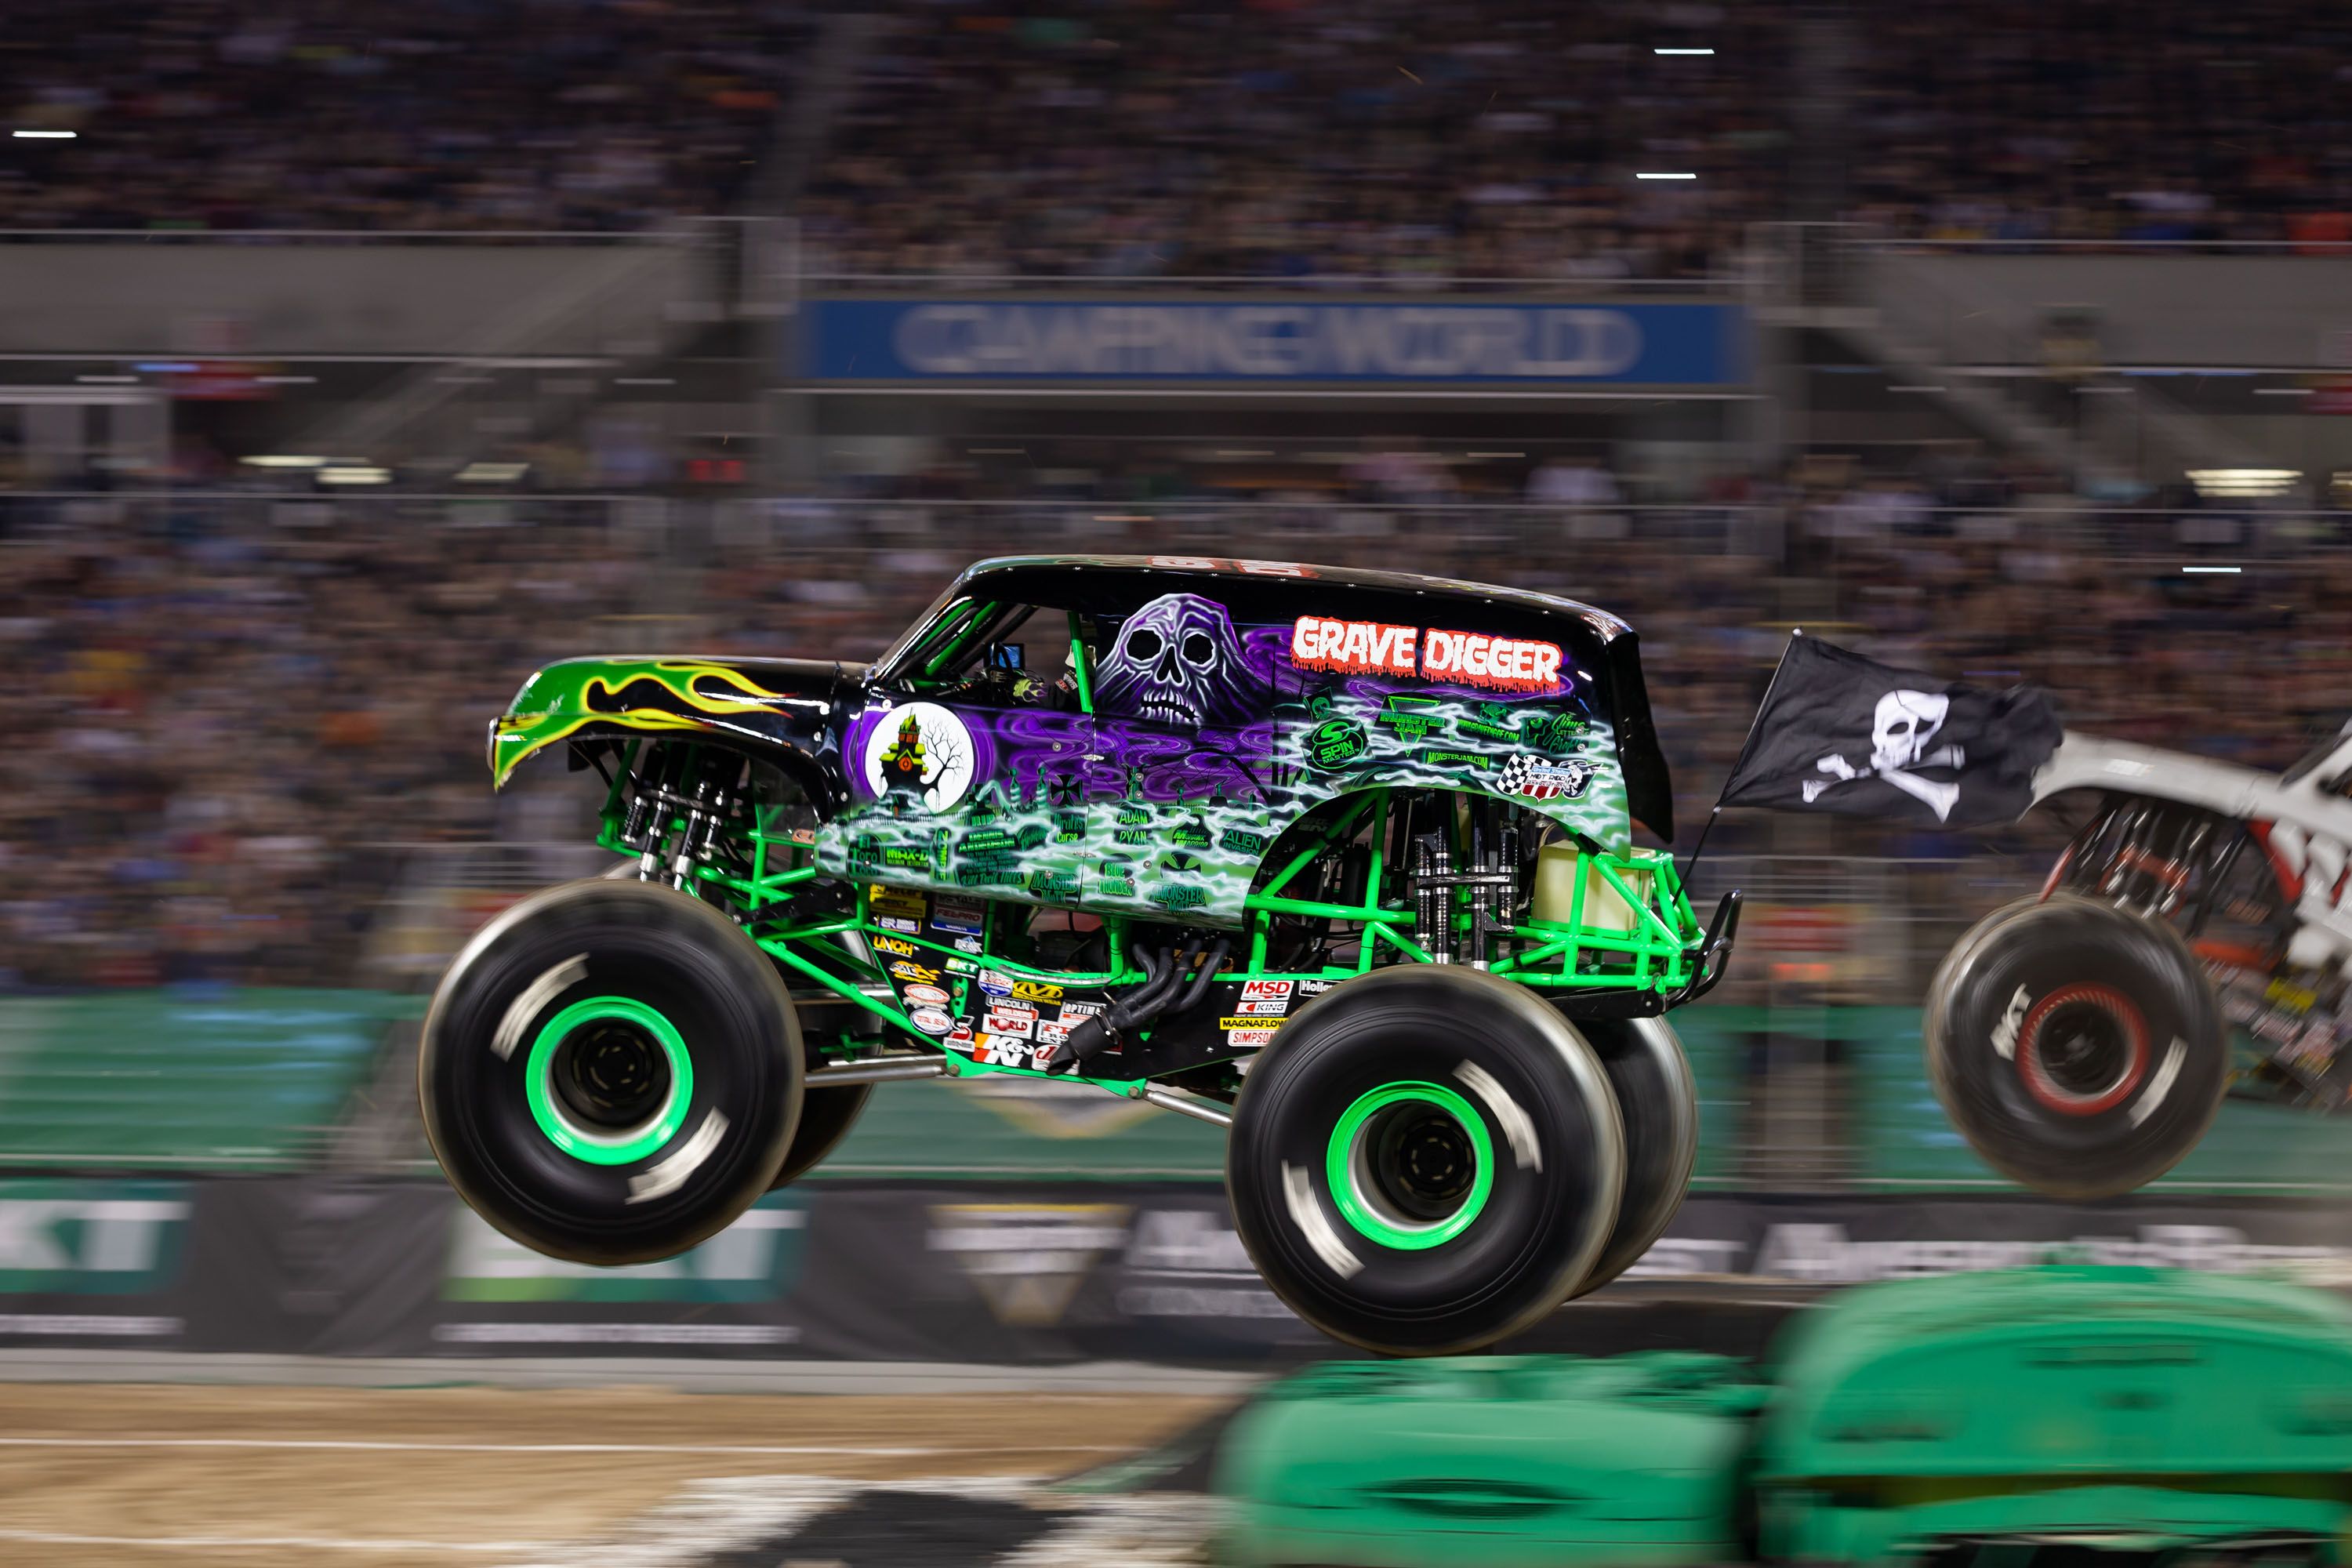 Monster Jam returns to Lincoln in March